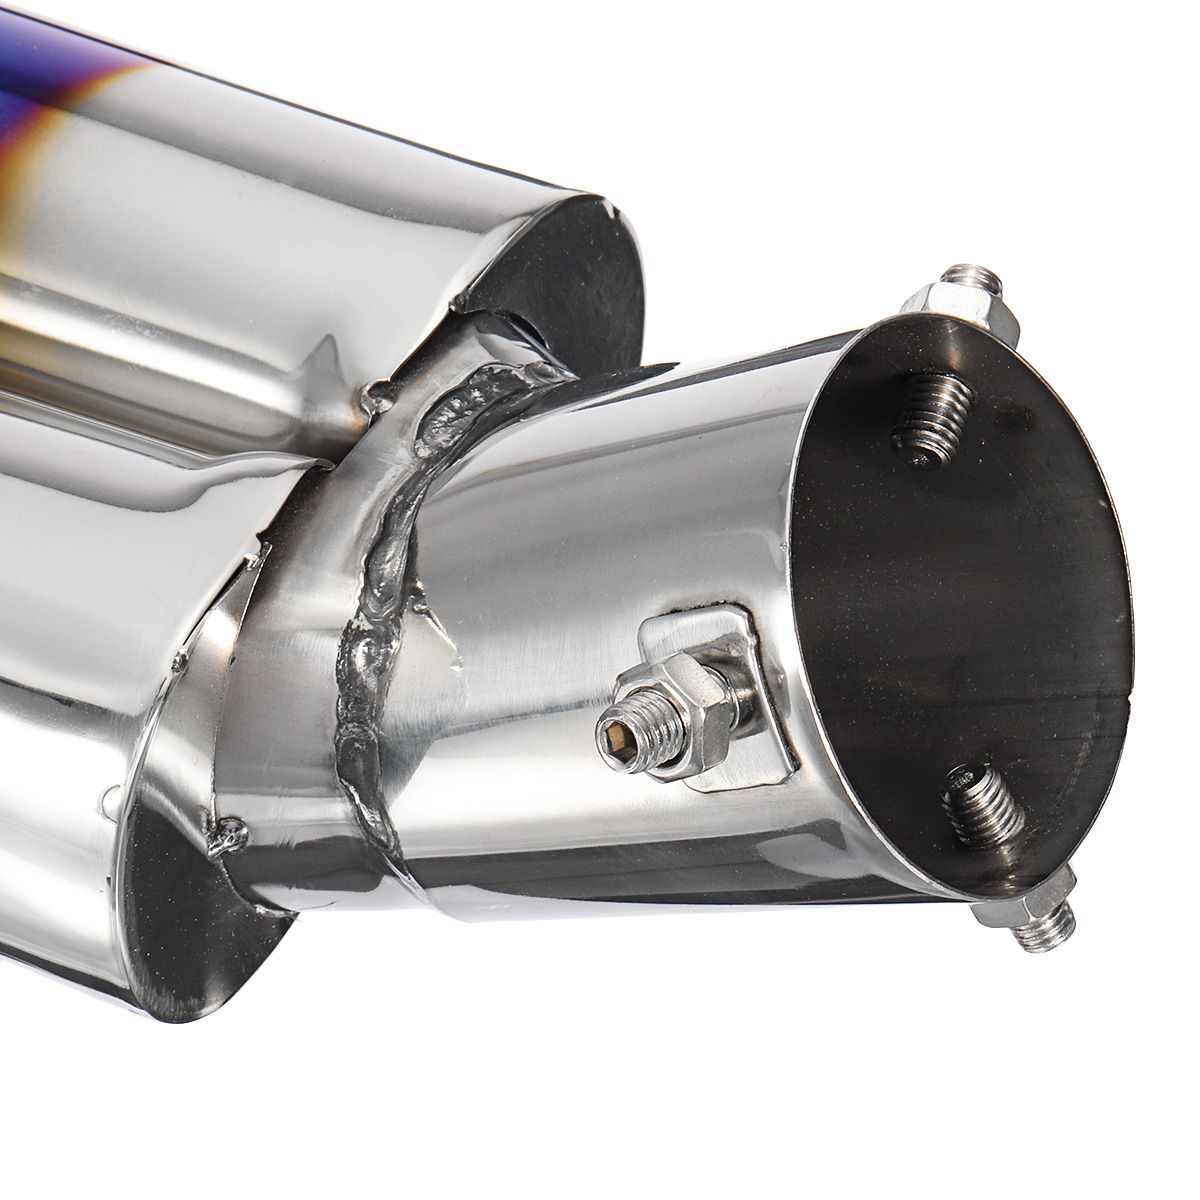 25-Inch-Blue-Car-Burnt-Dual-Exhaust-Pipes-Polished-Stainless-Steel-1208641